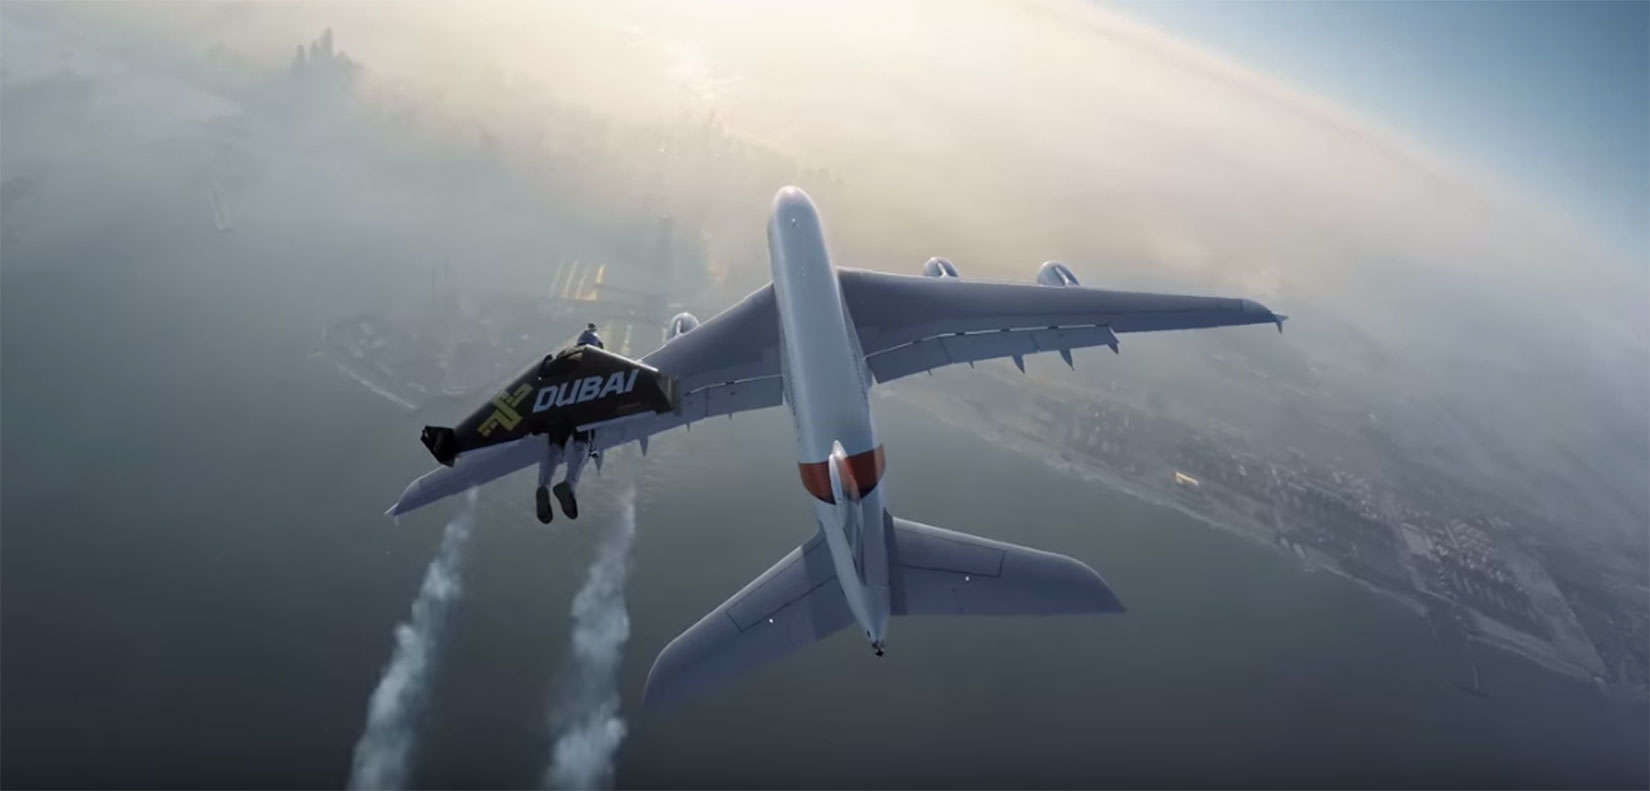 A Jetman Dubai pilot soars to catch up with an Emirates A380 commercial jet.